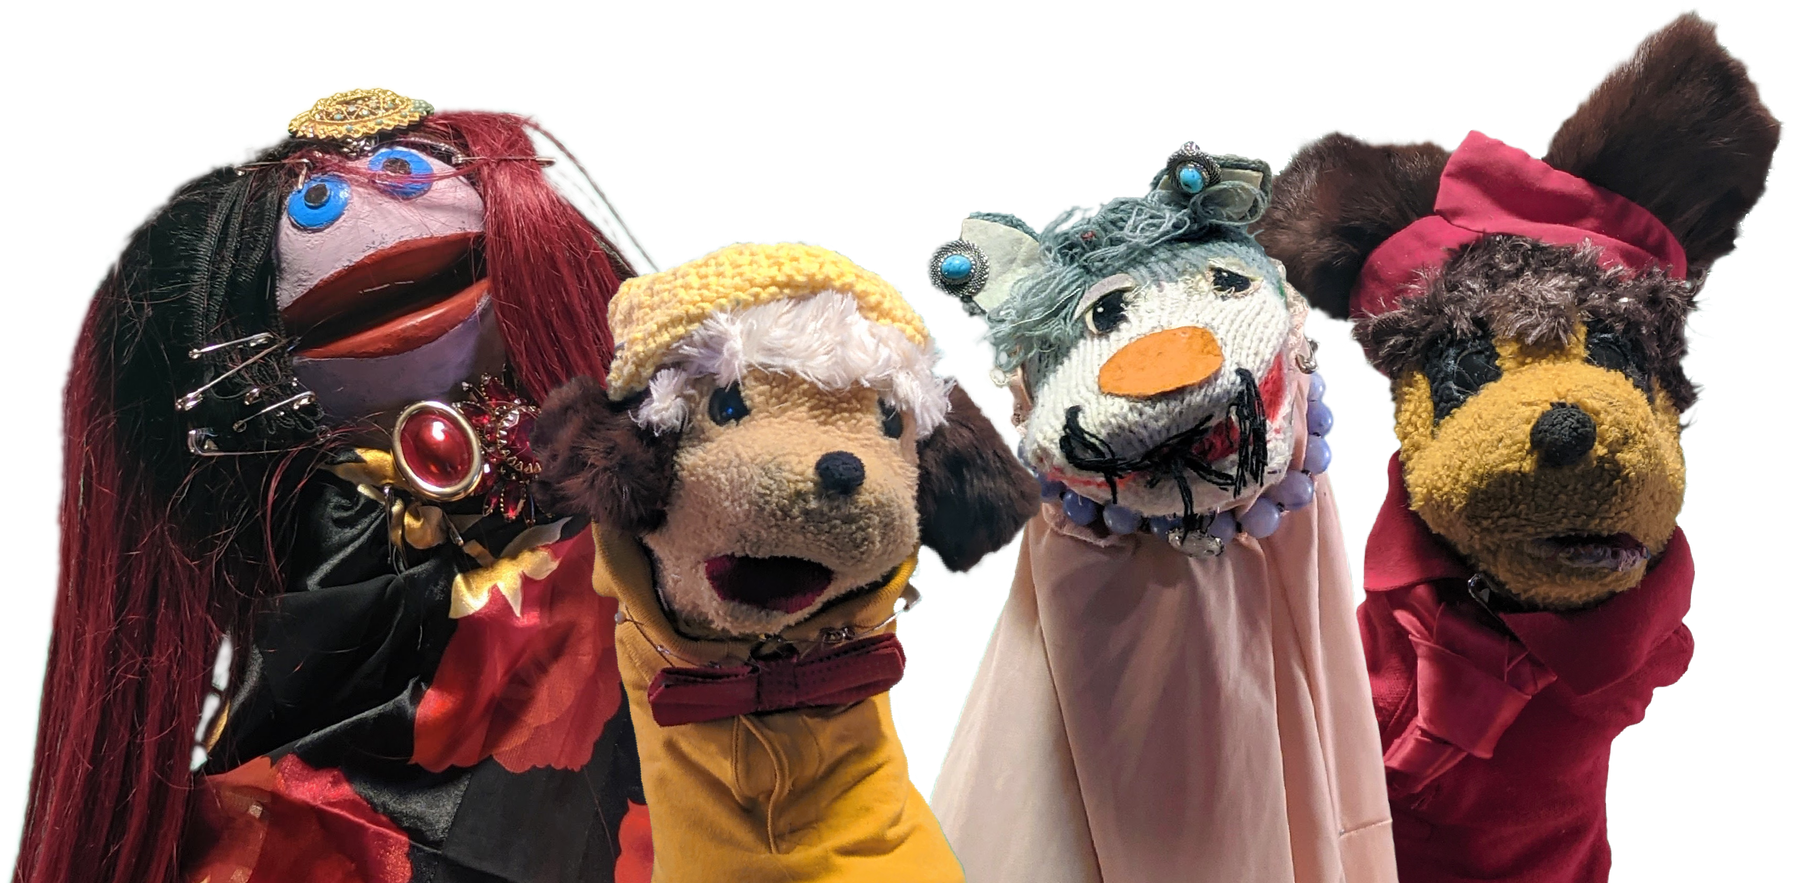 The Dragonsail Puppets